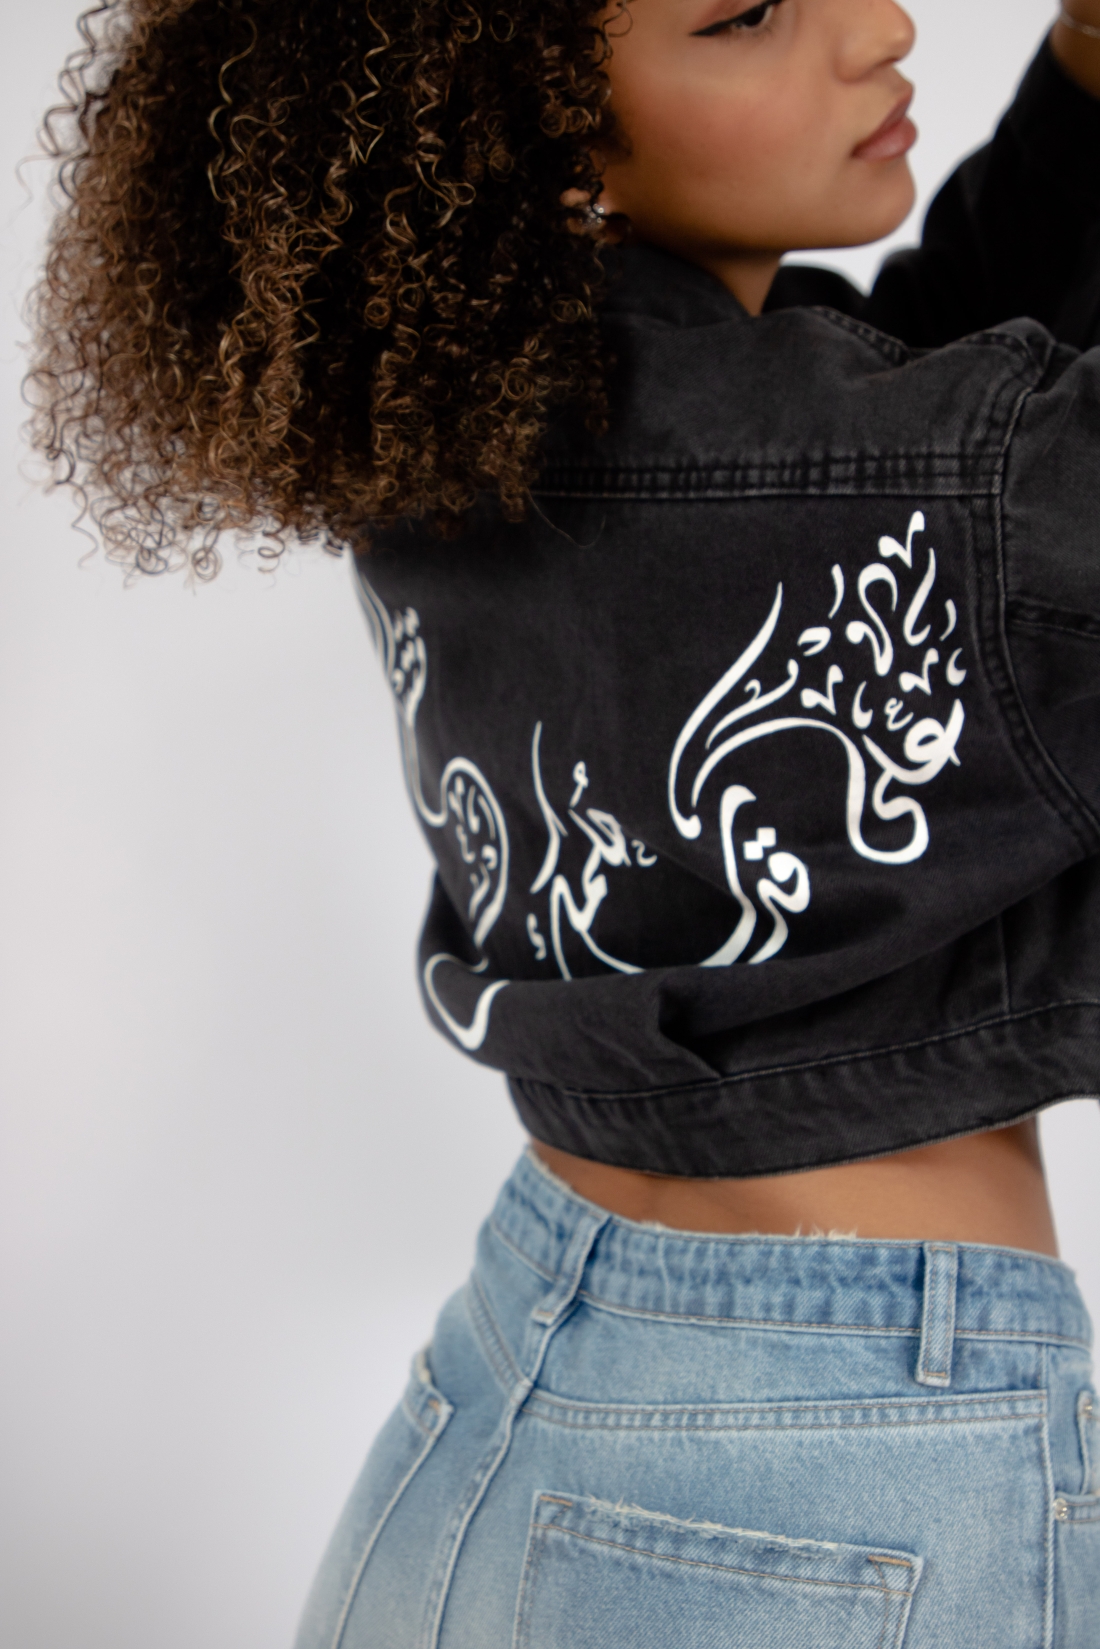 Exclusive denim jacket in black wash with hand-painted Arabic Calligraphy